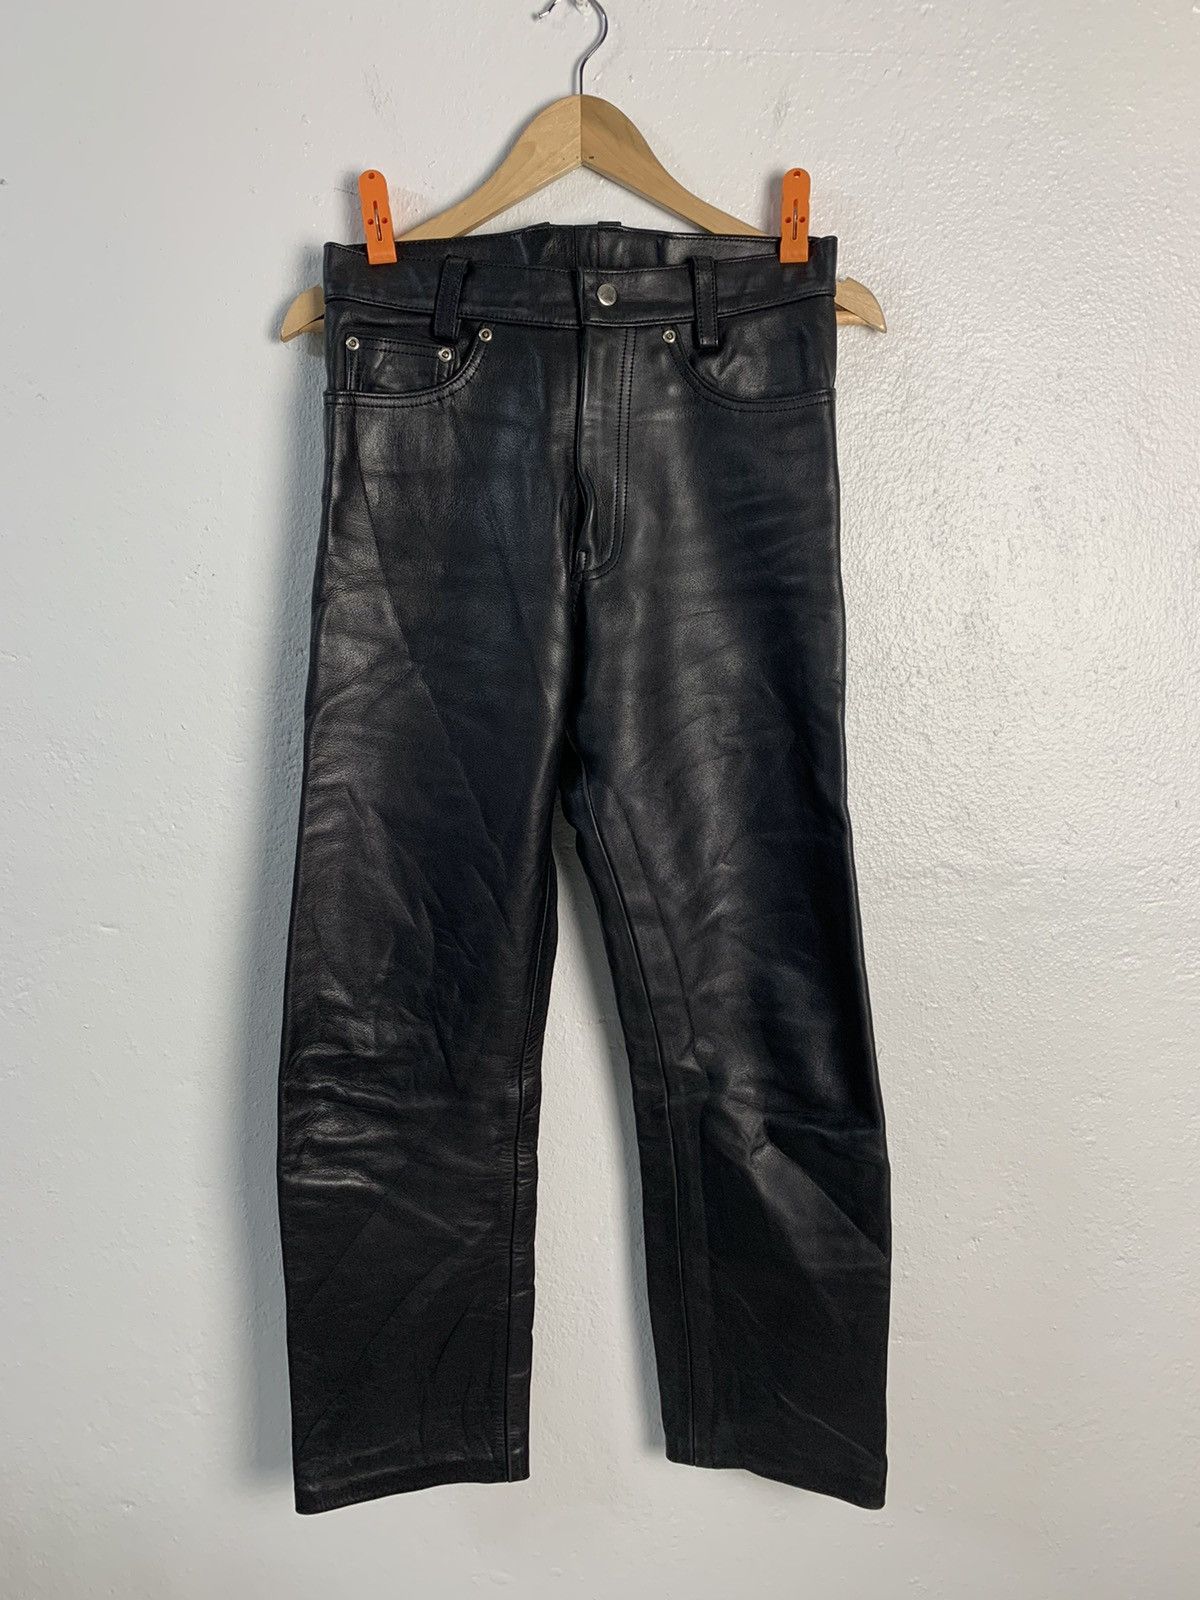 Freedom Freedom Leather Pants | Grailed